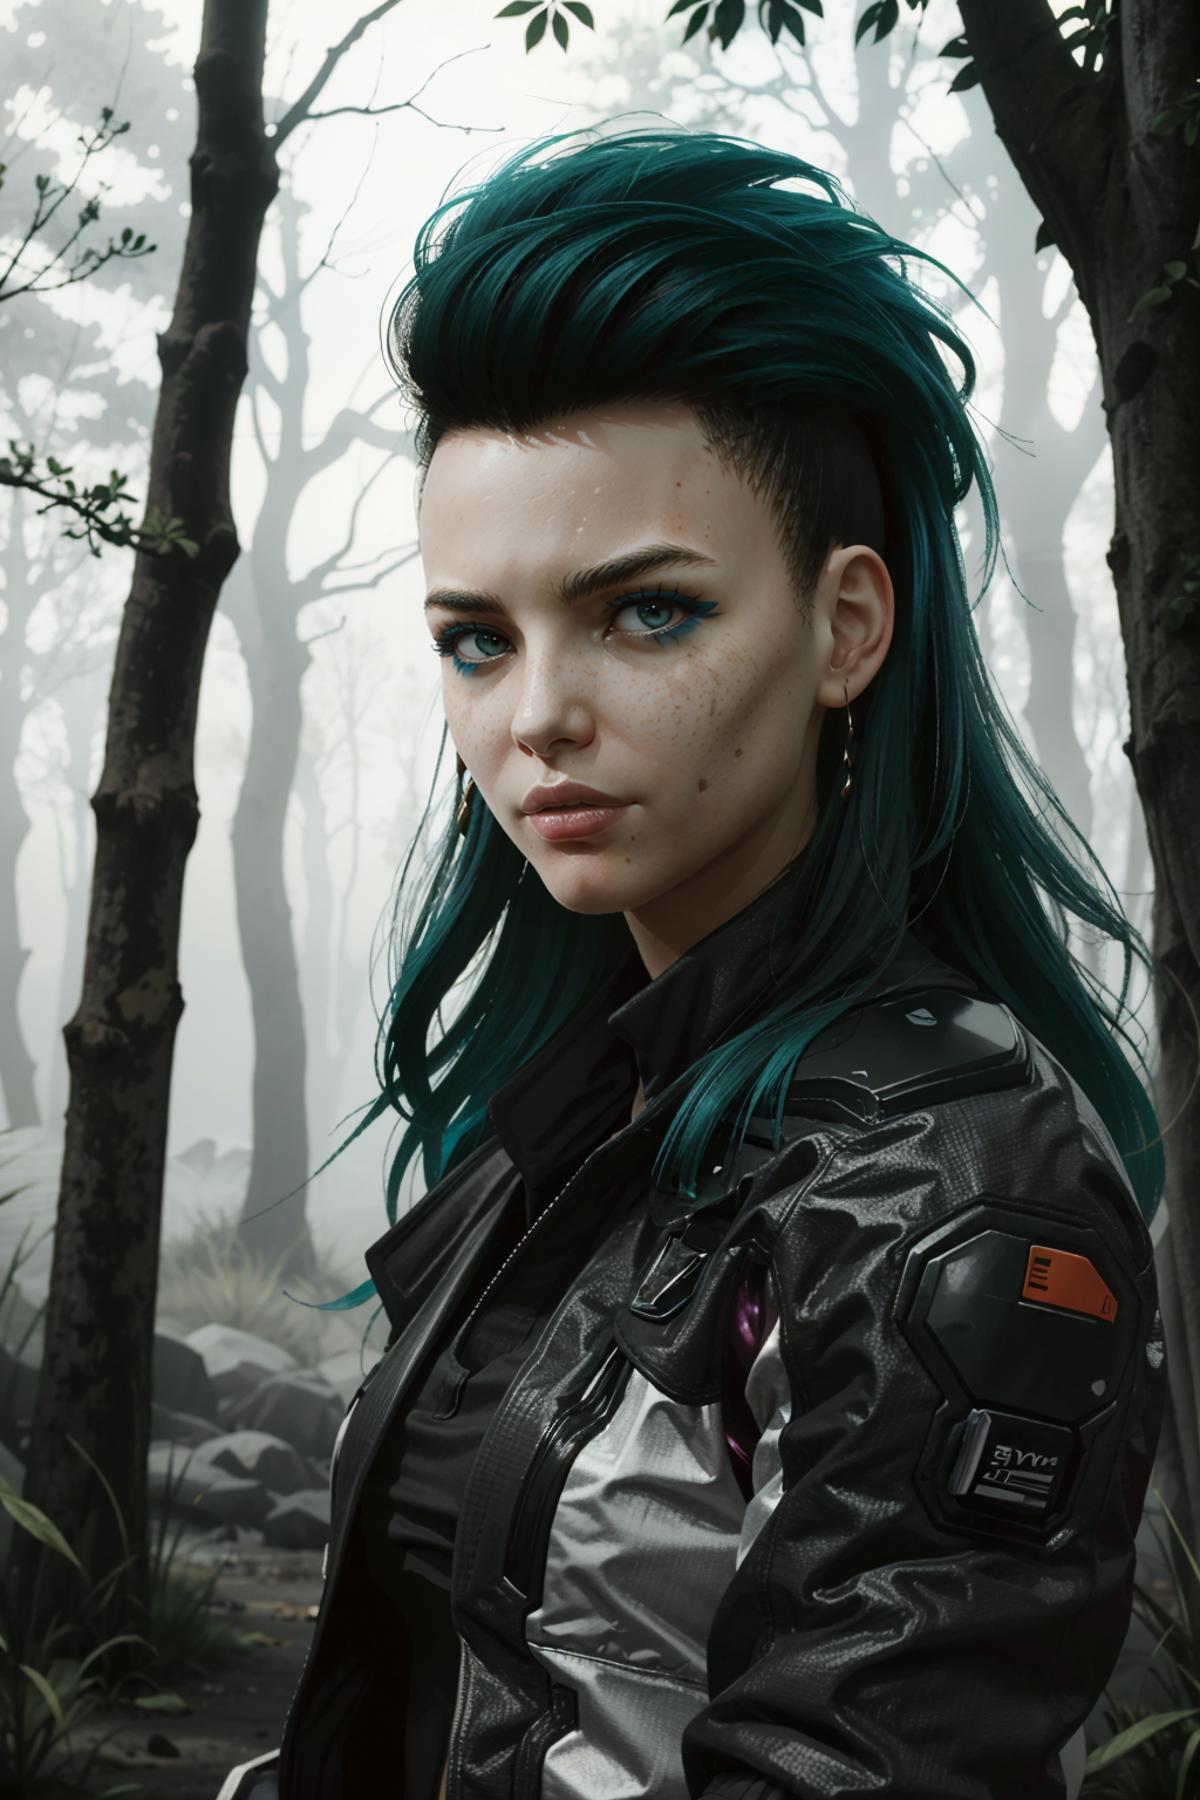 Young Rogue from Cyberpunk 2077 image by BloodRedKittie